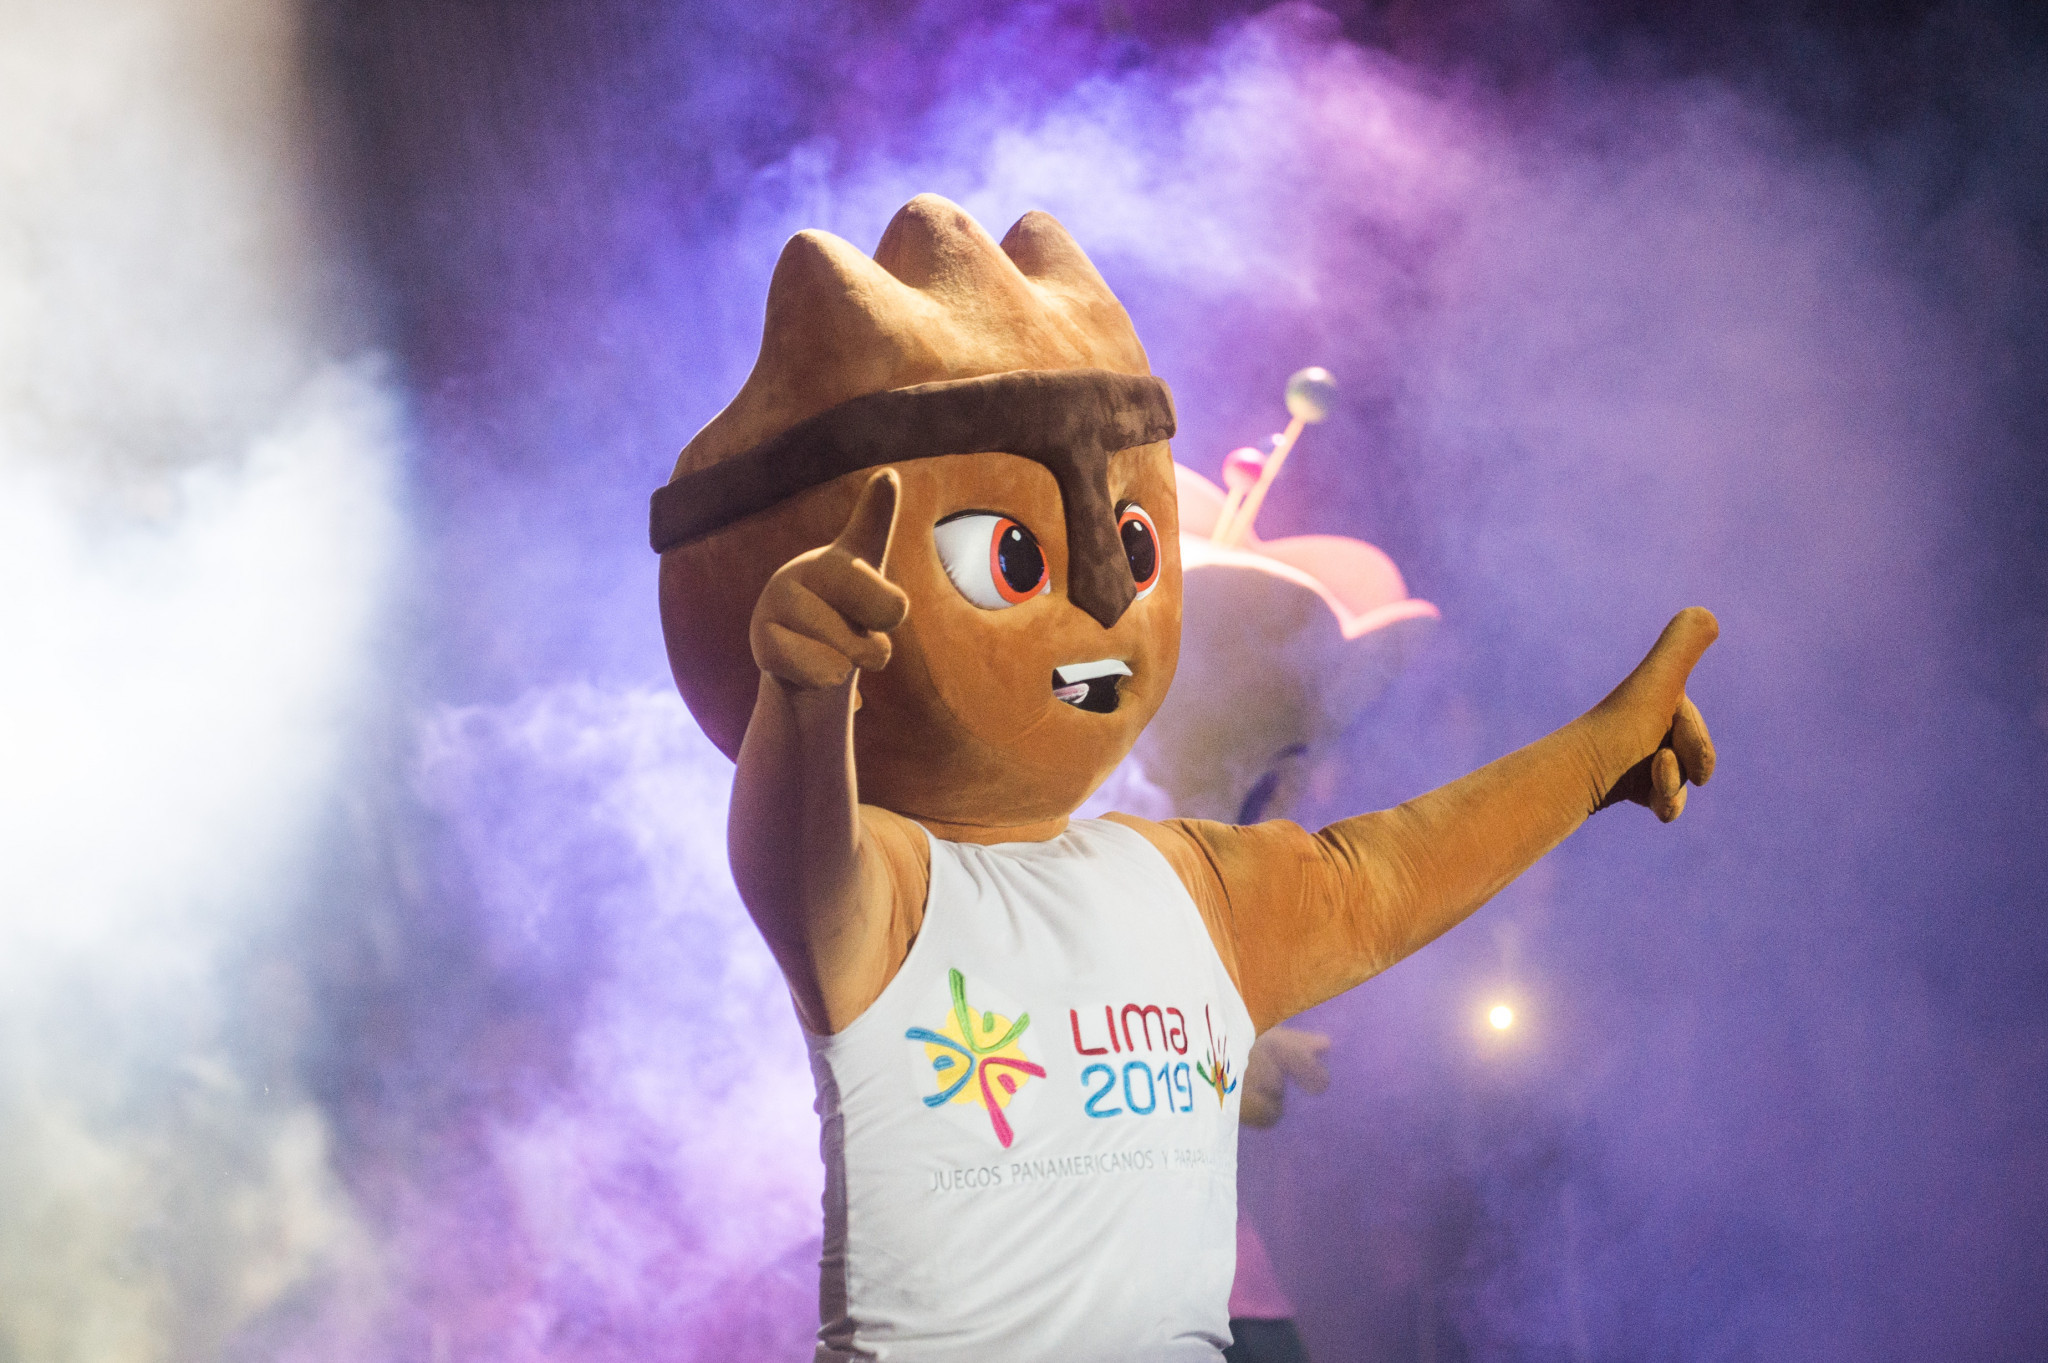 Lima 2019 hope transport will play key part in Pan American Games legacy